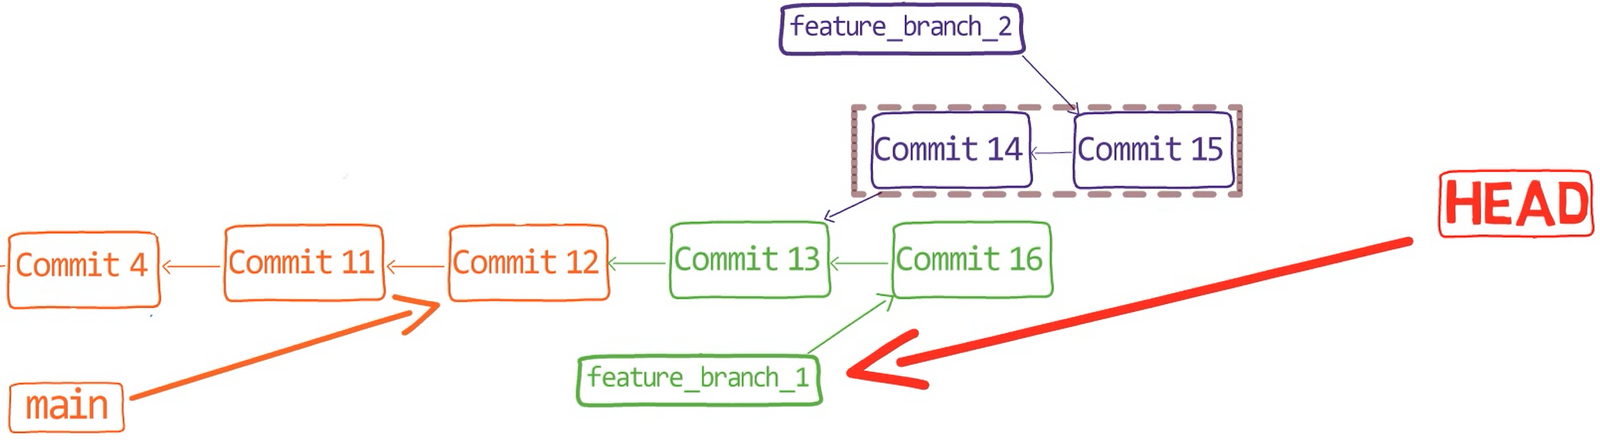 You want to move around "Commit 14" and "Commit 15"